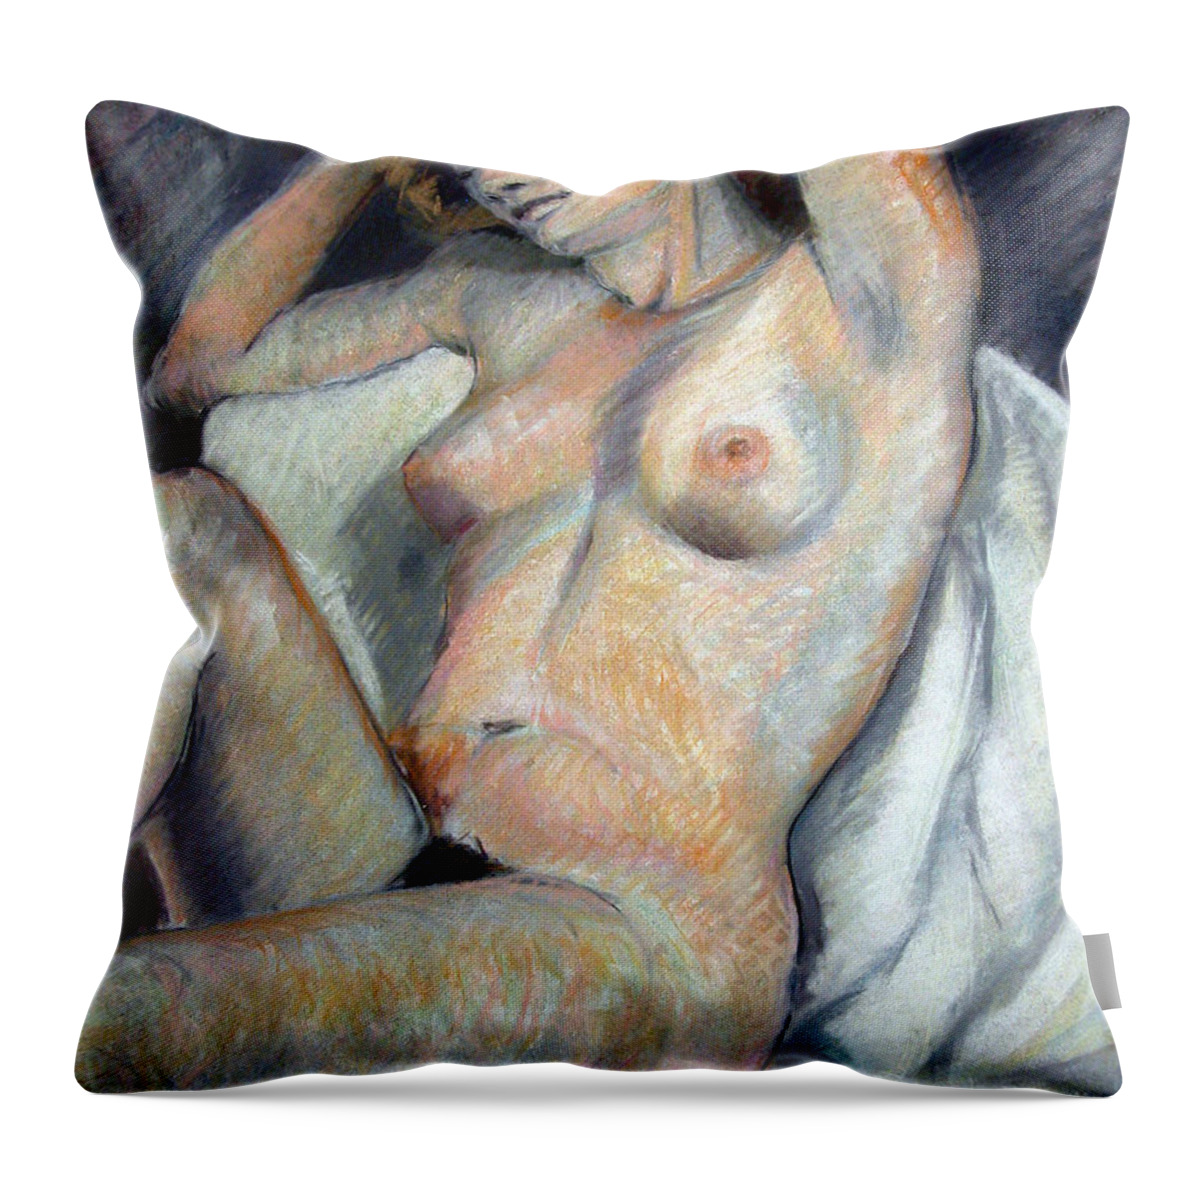 Nude Throw Pillow featuring the painting Seated Nude #1 by Synnove Pettersen